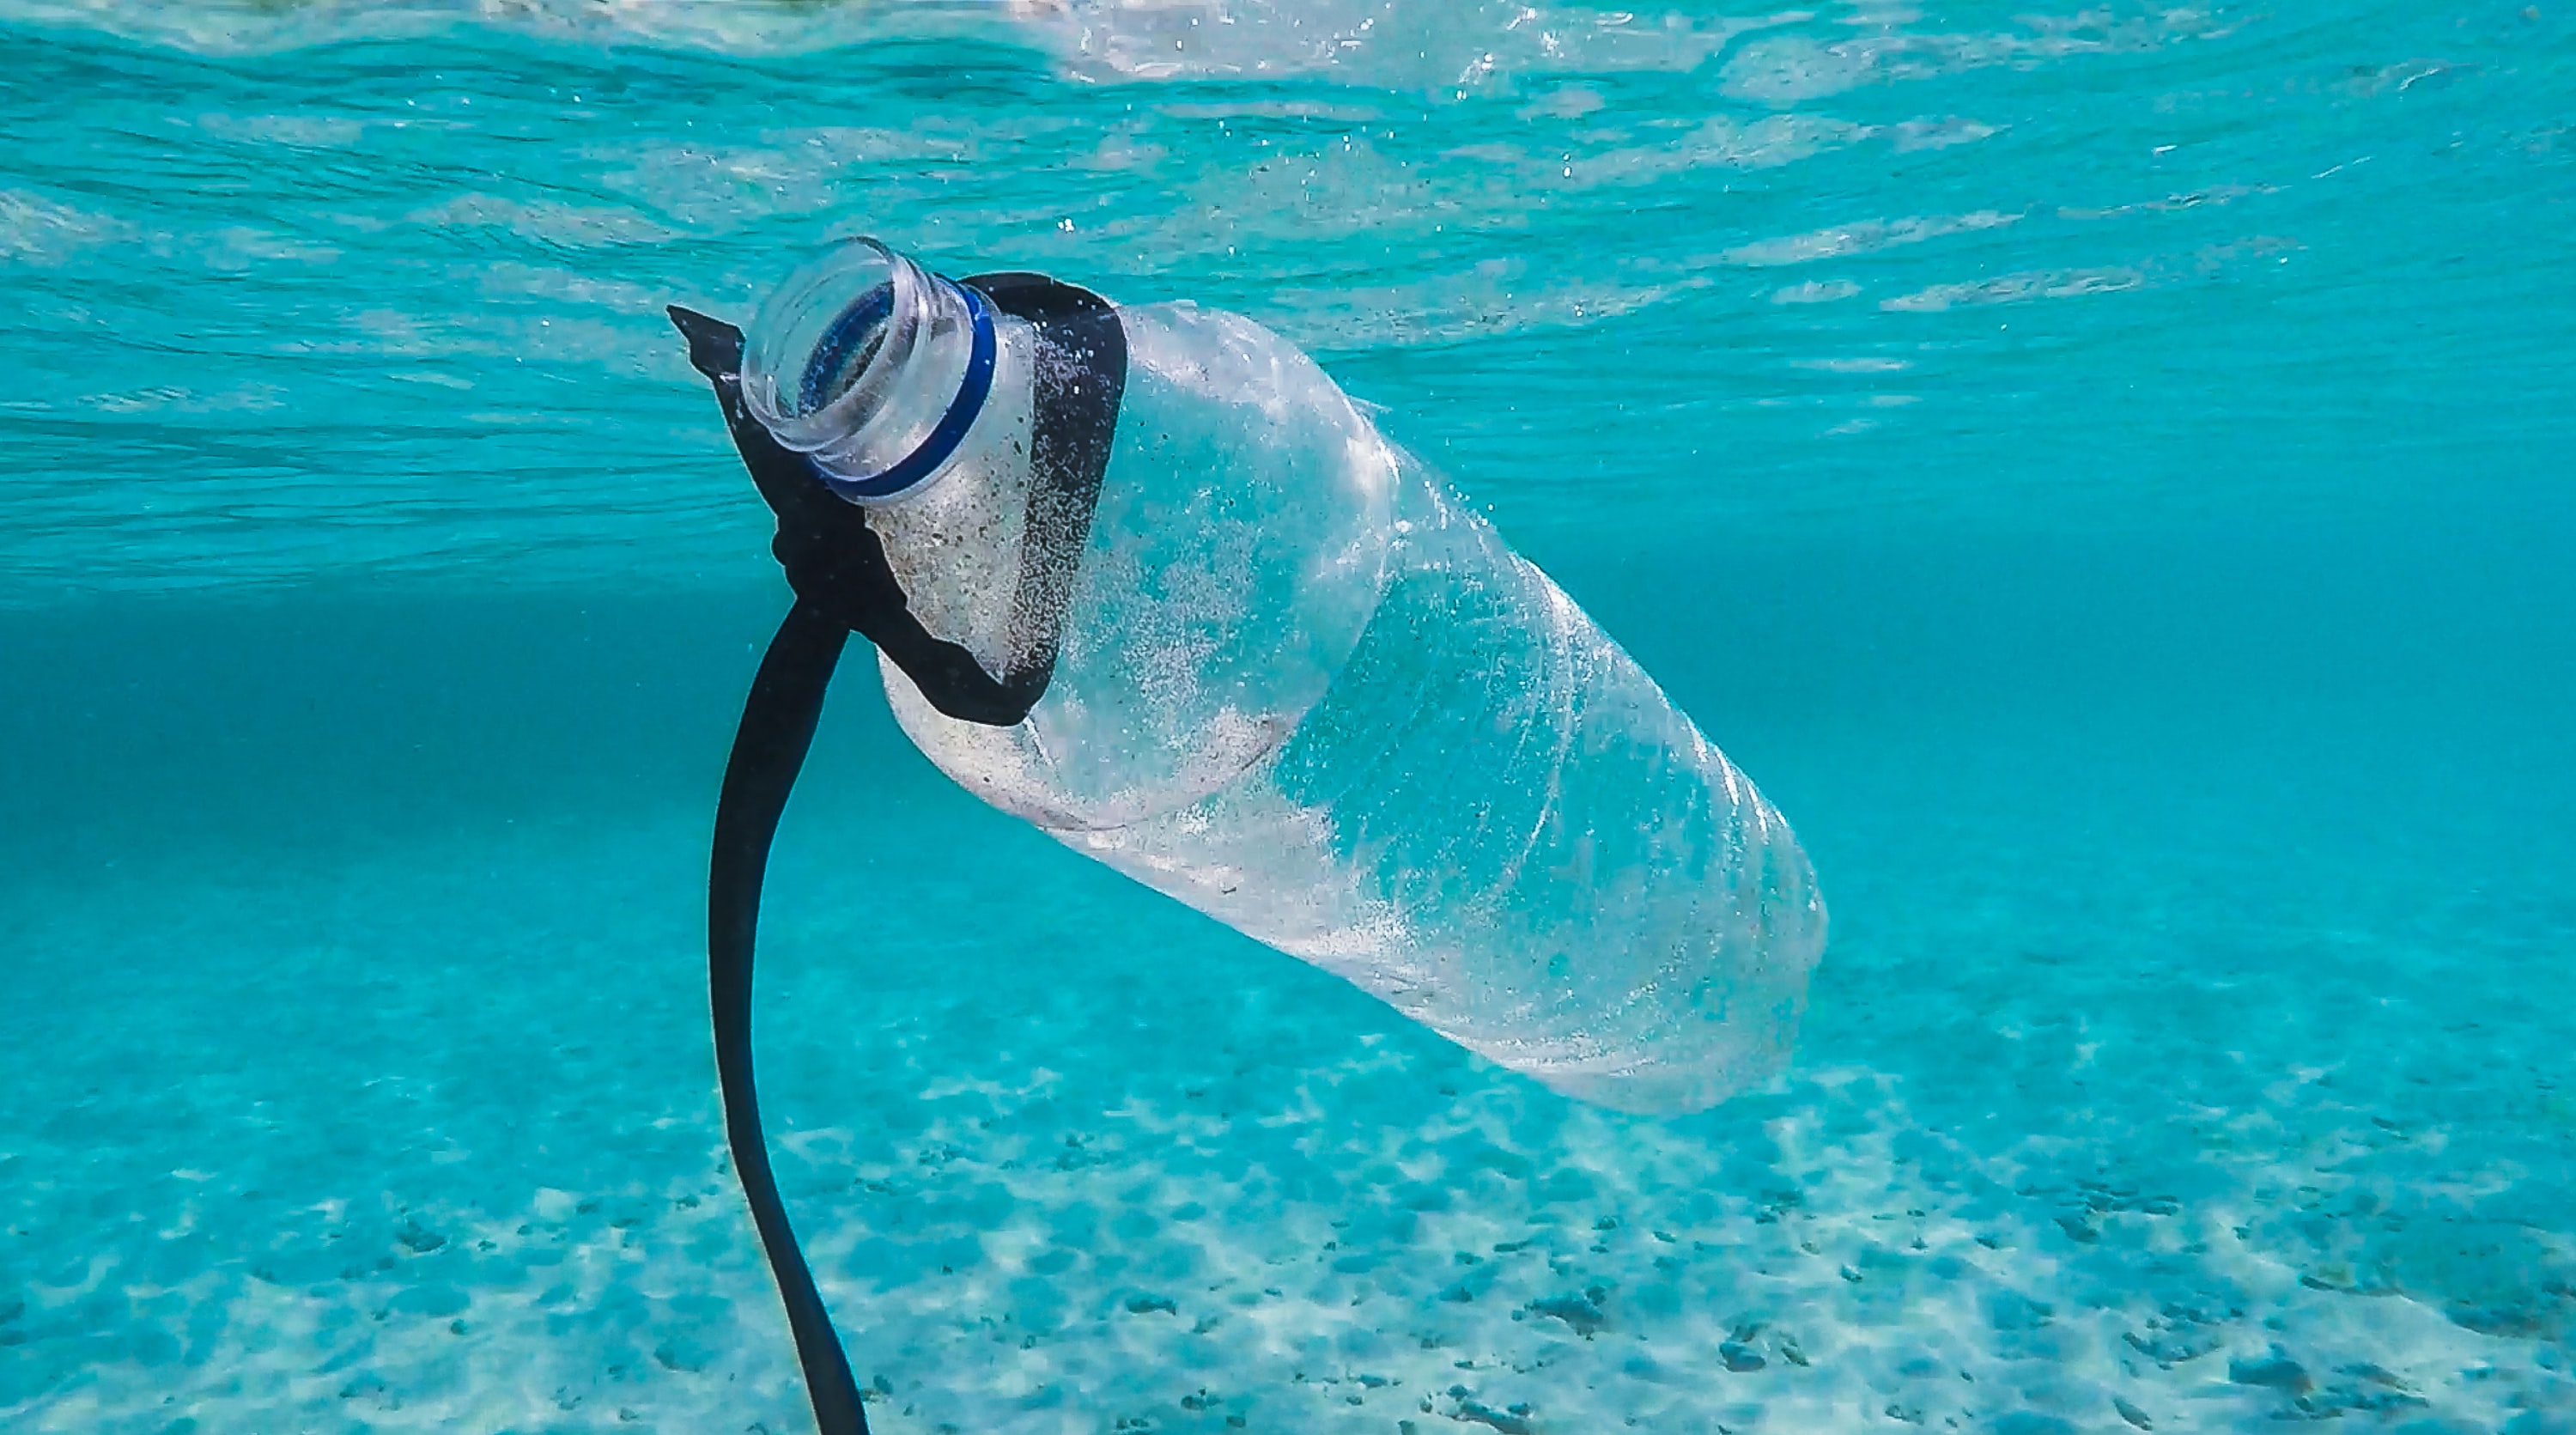 Save money, emissions and the ocean by trading off plastic bottles with a water disinfection system. As a result, the ship will be sustainable and the substantial recurring cost of plastic bottles will disappear. 